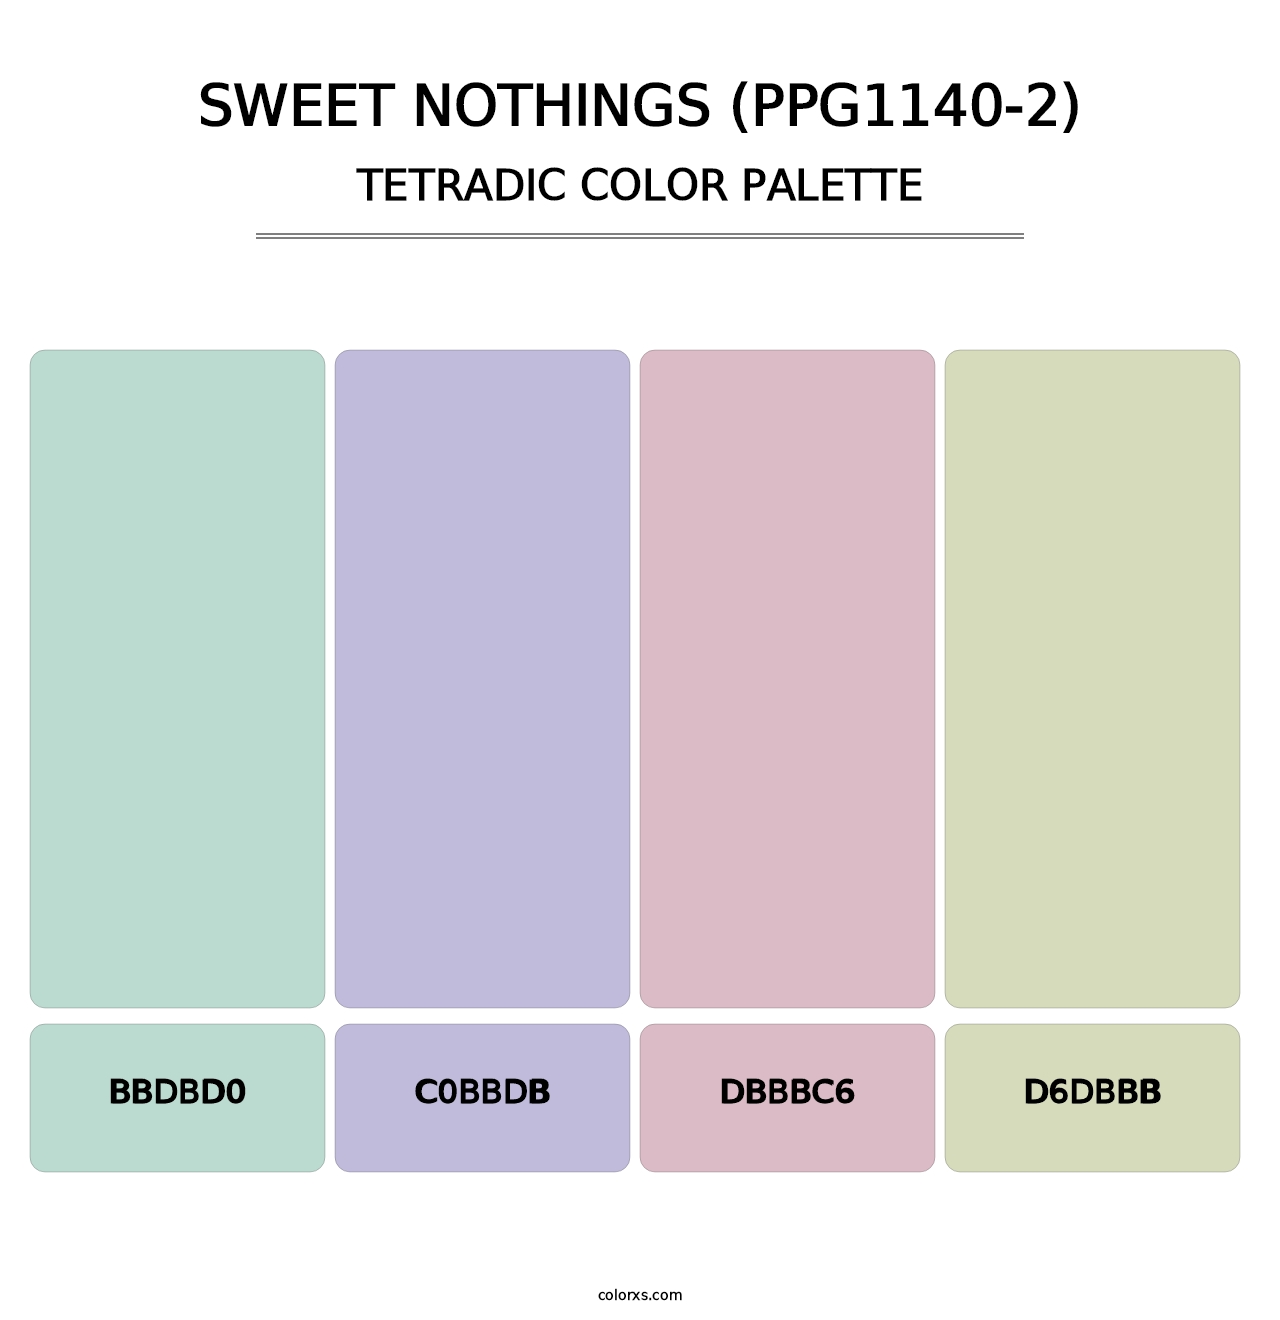 Sweet Nothings (PPG1140-2) - Tetradic Color Palette